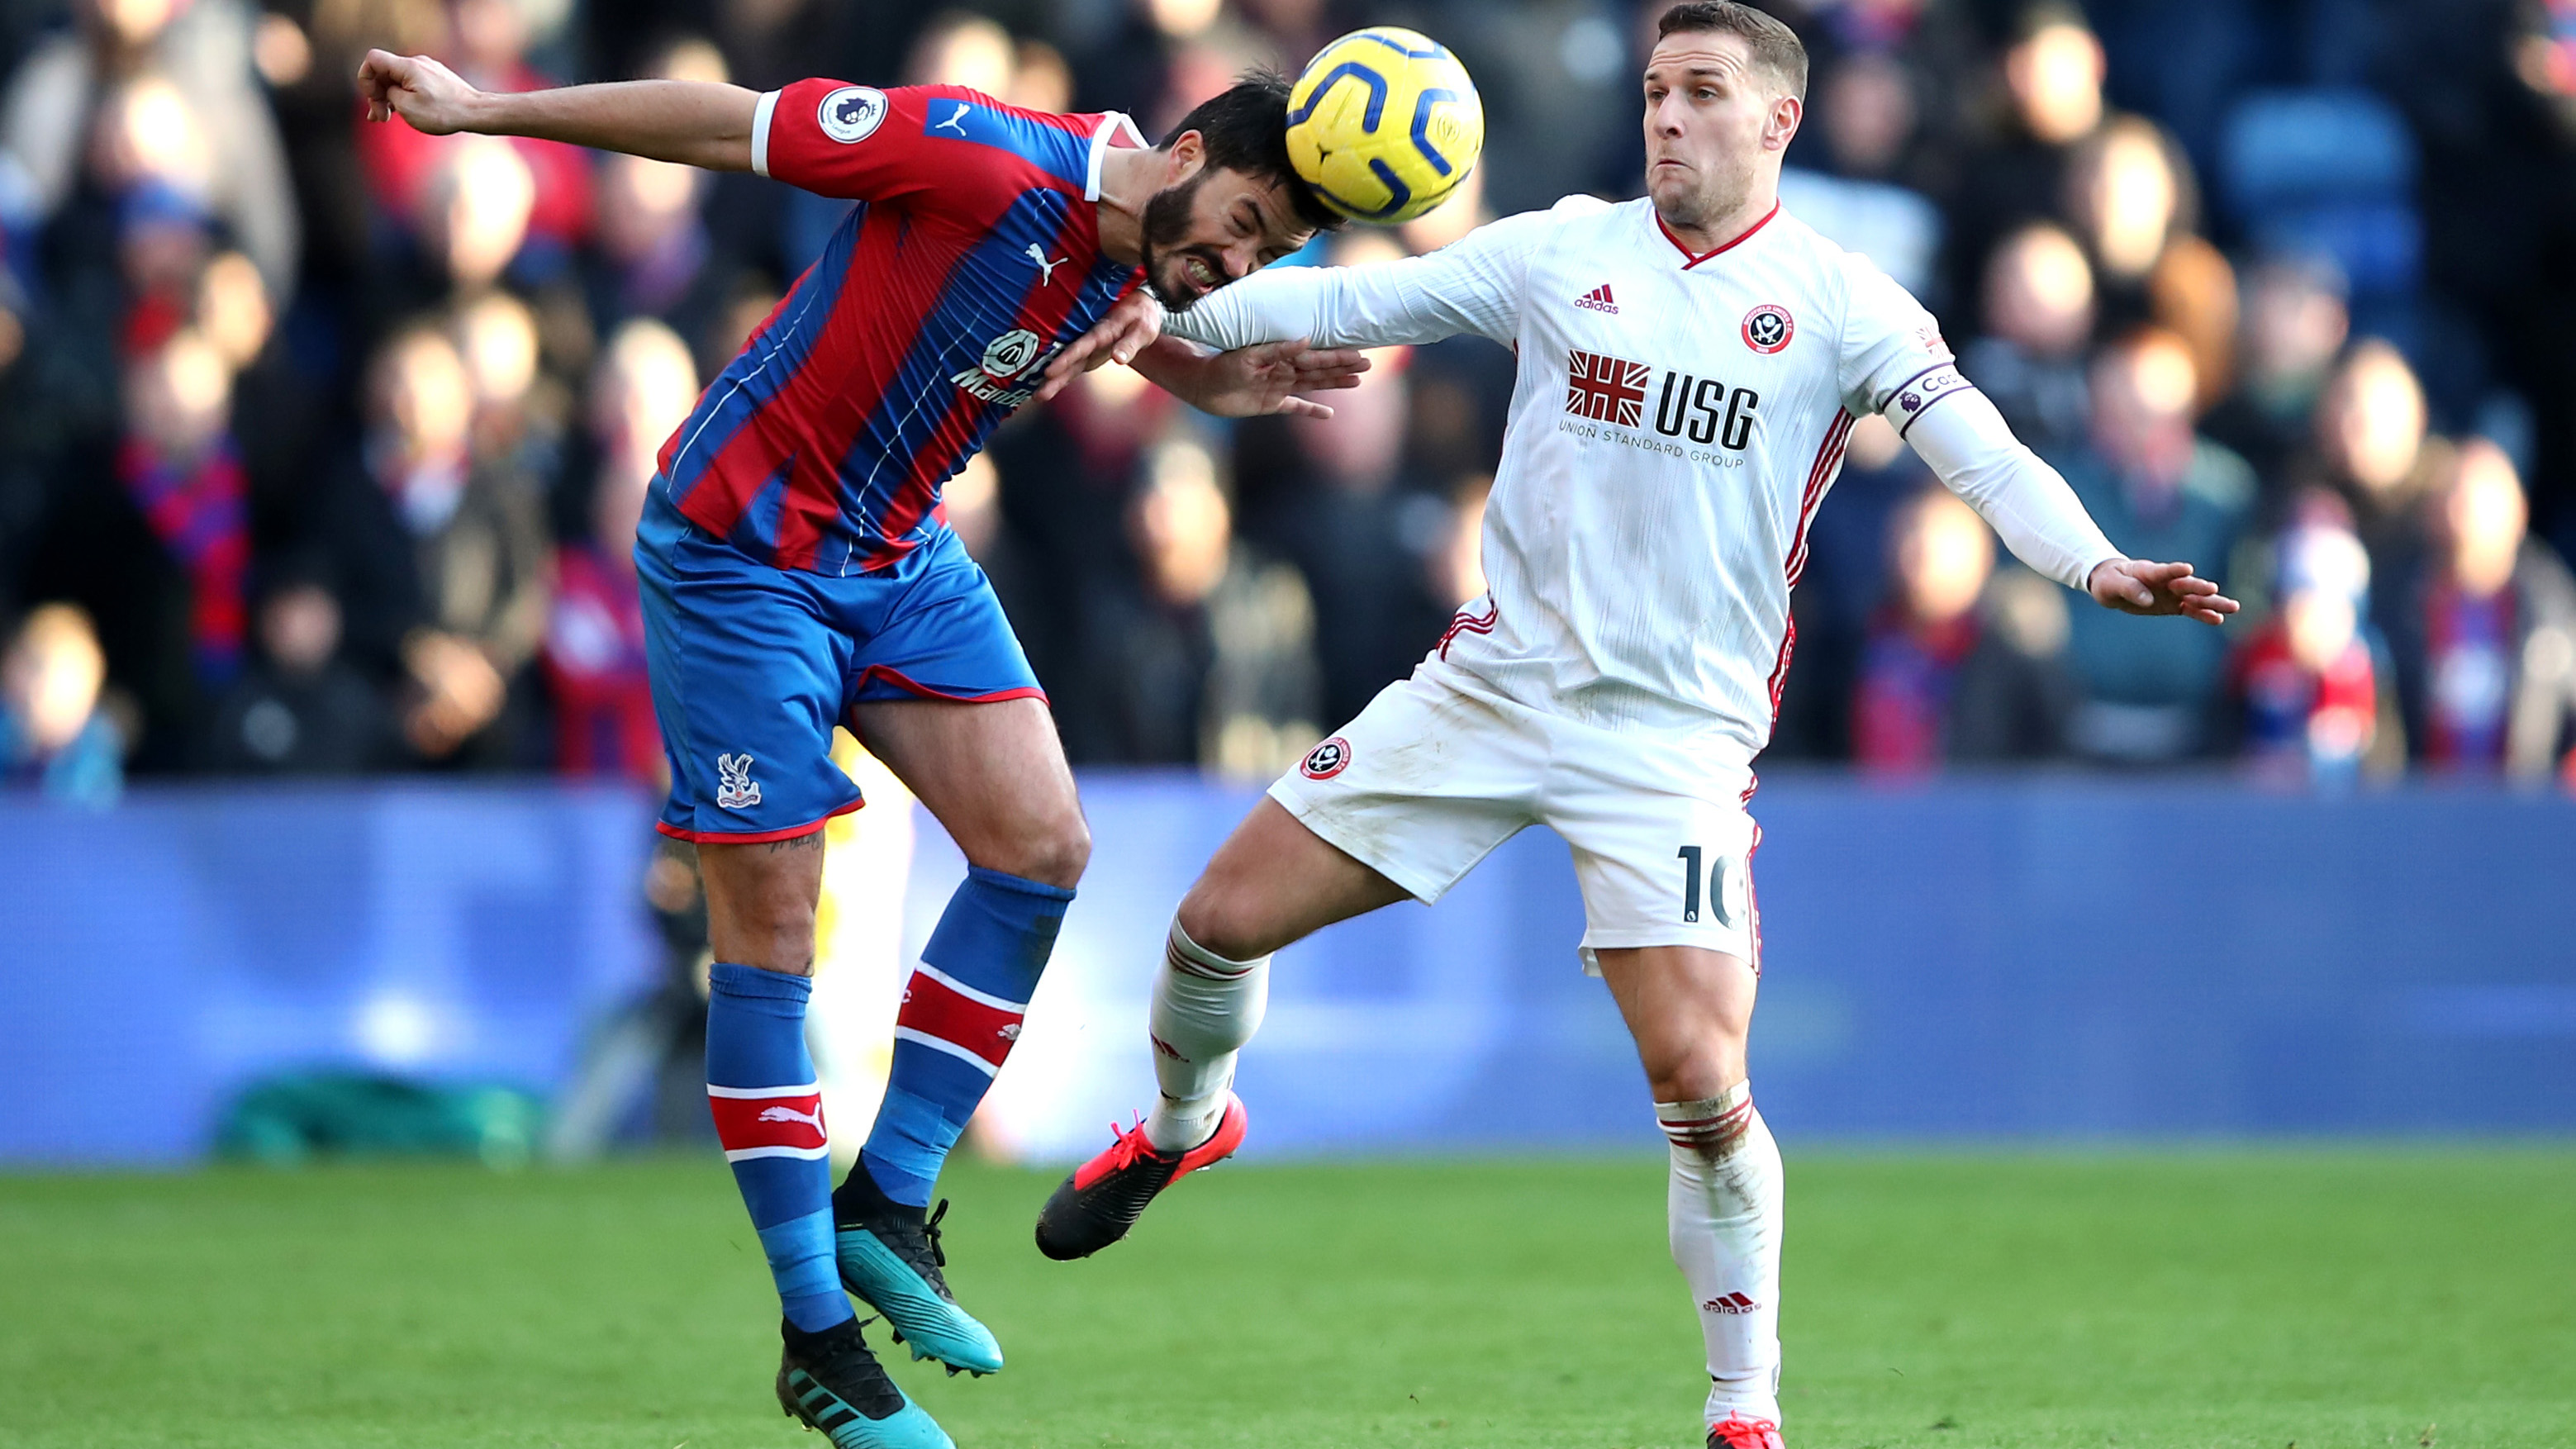 Extended HL: Crystal Palace 0, Sheffield United 1.